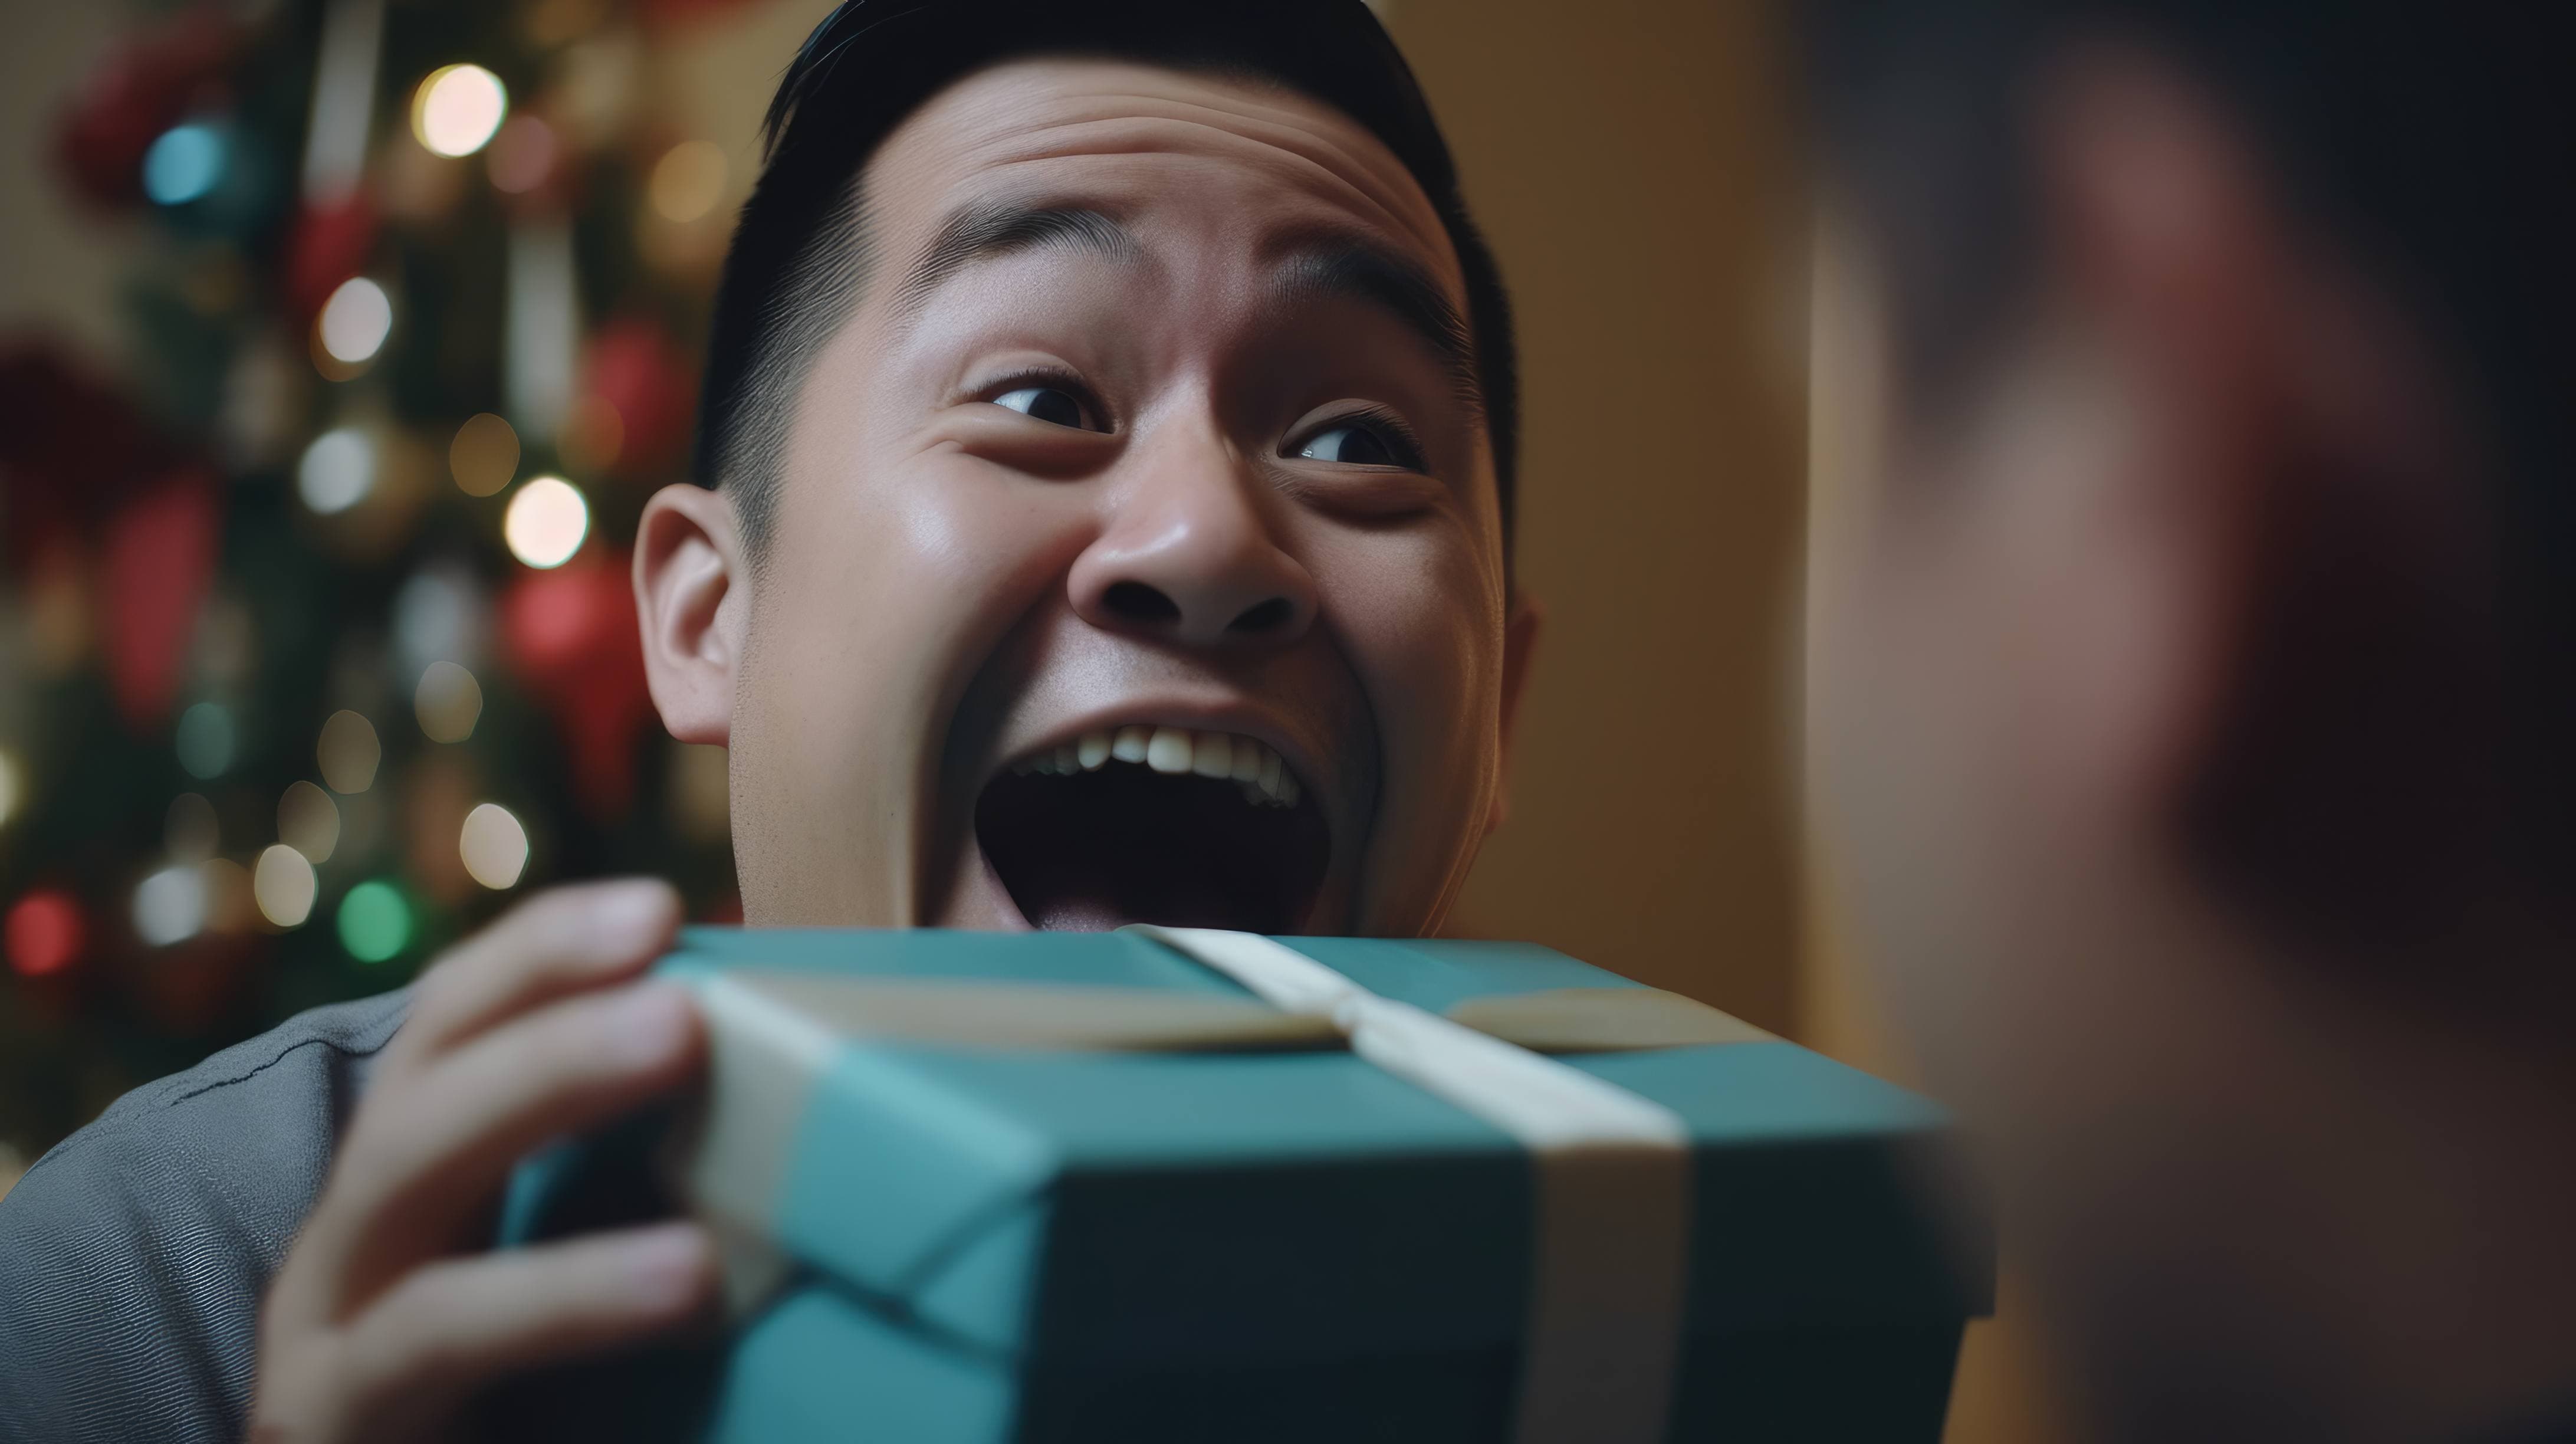 Surprised person opening a gift